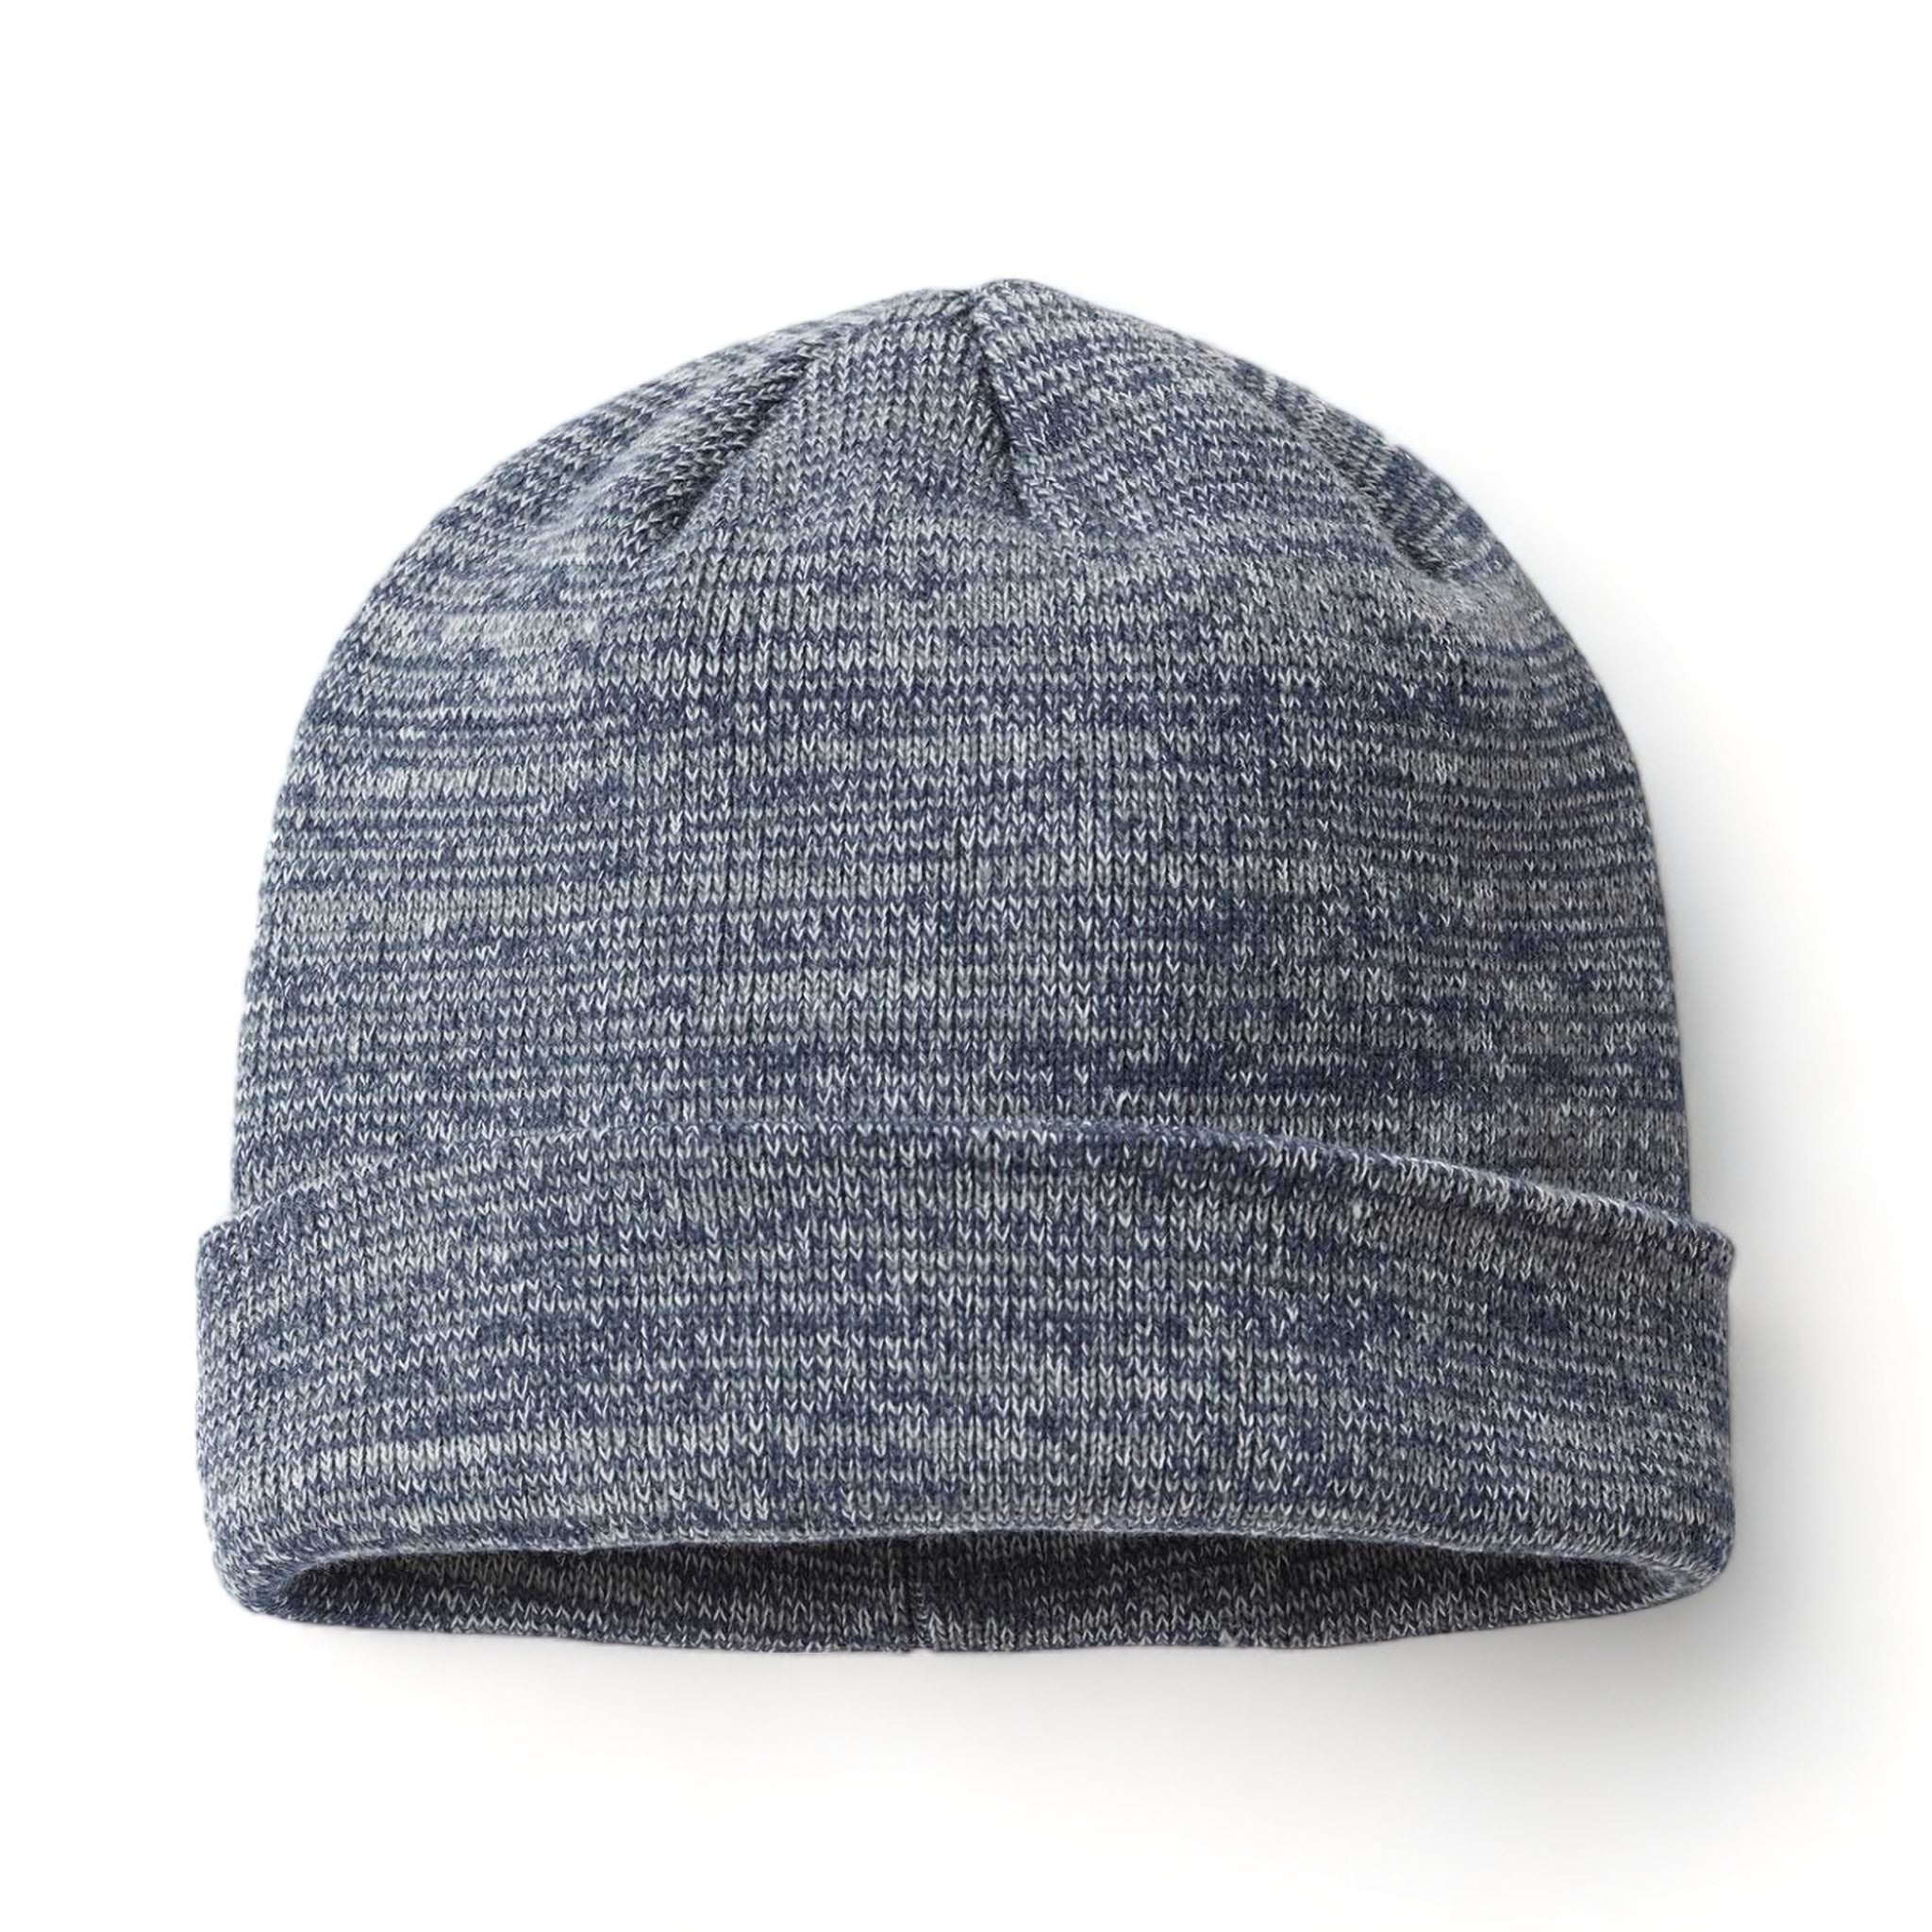 Front view of Richardson 130 custom hat in navy, grey and white